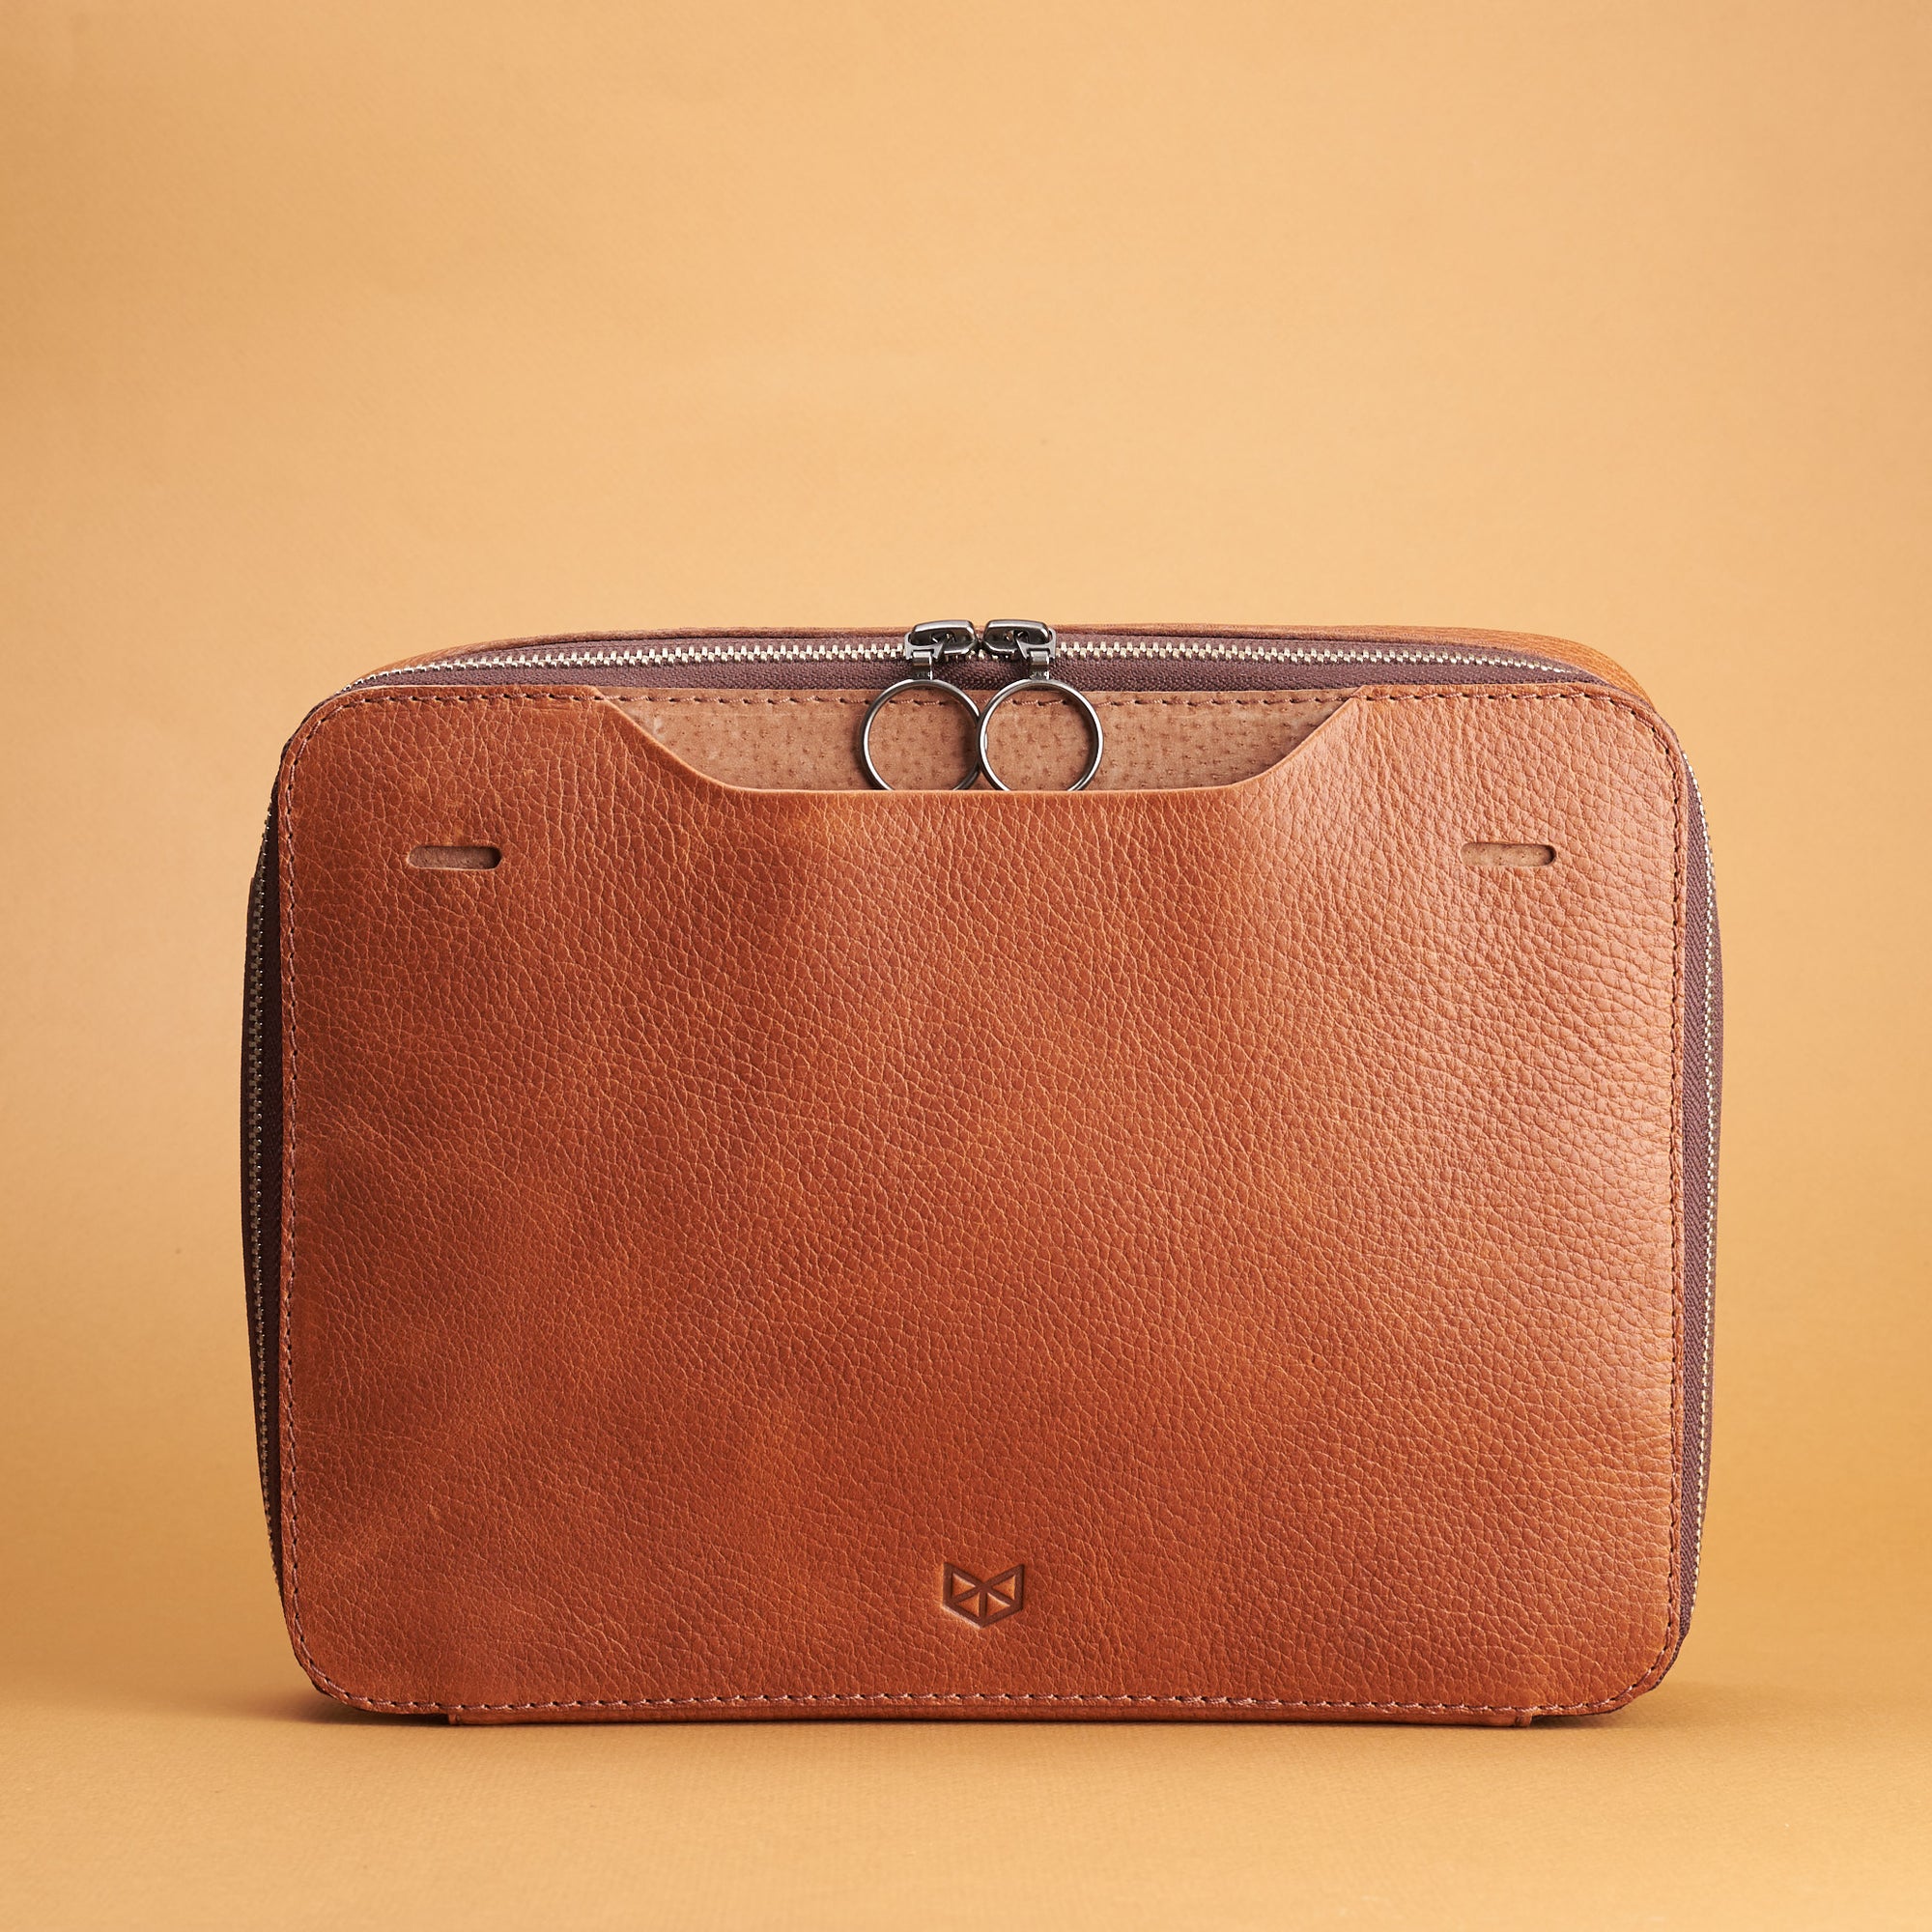 Small gadget bag. Best tech travel bag tan by Capra Leather